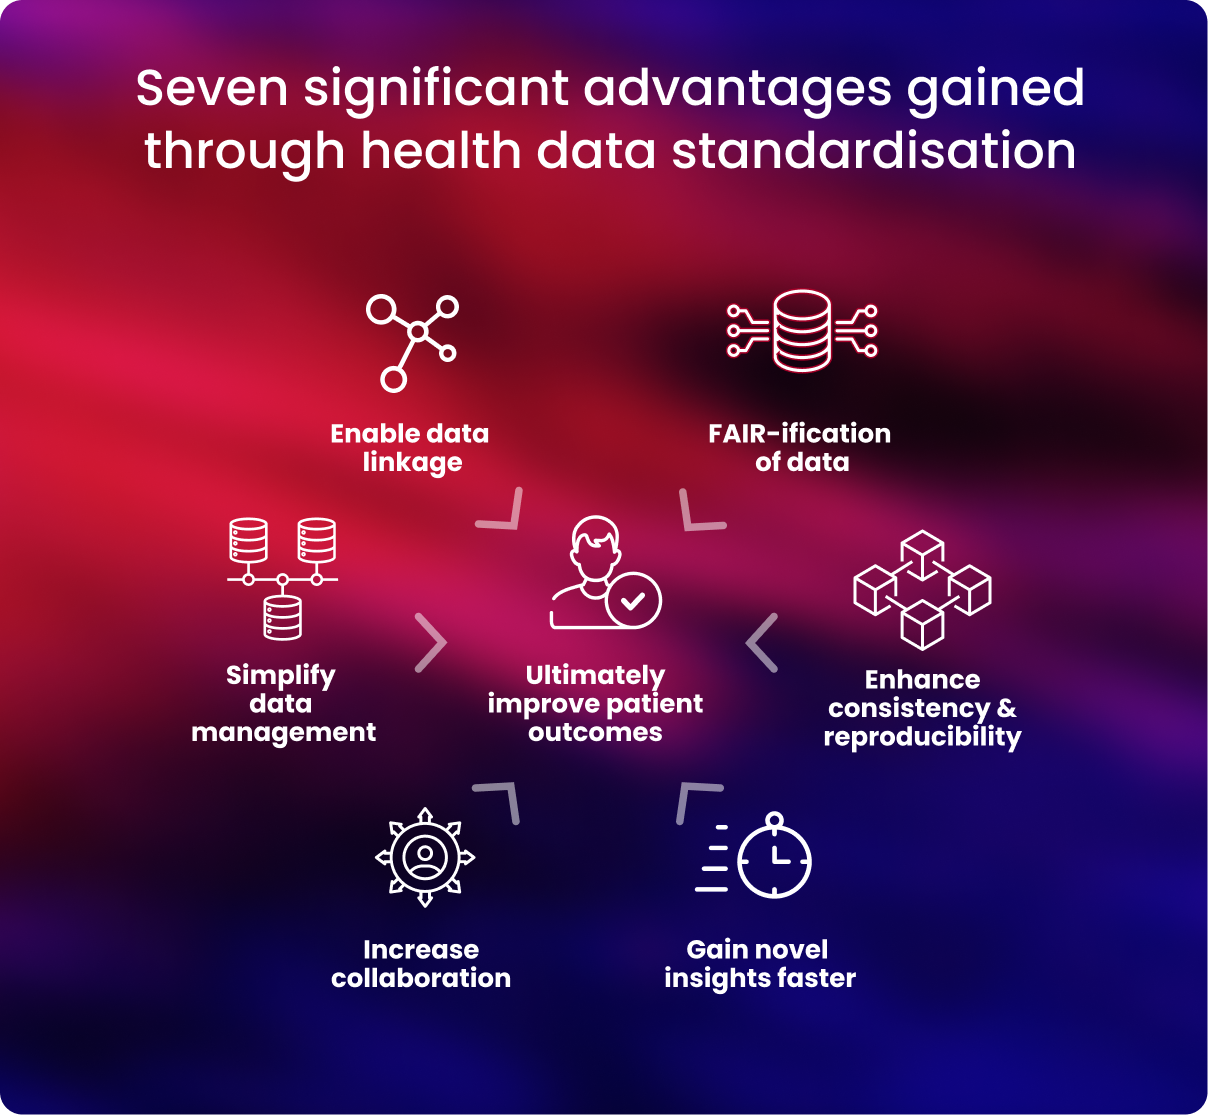 Health data standardisation brings benefits to researchers which include enhancing data quality, interoperability and promoting collaboration and analysis.